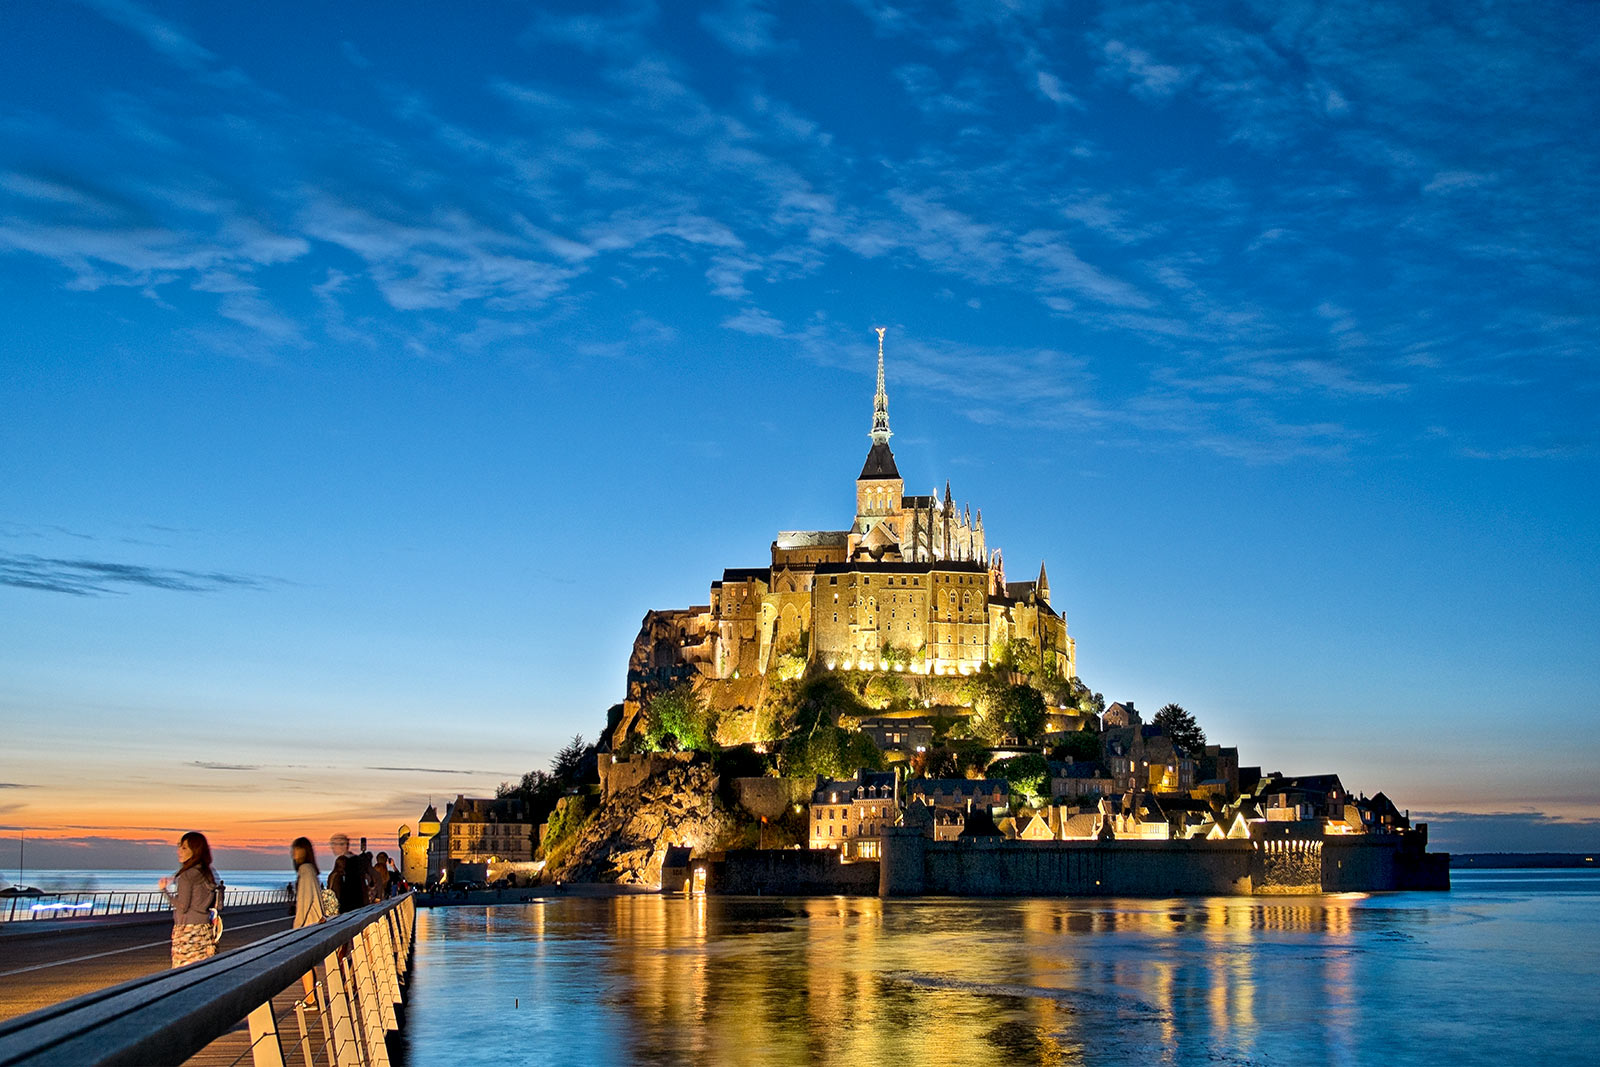 Easing lockdown: Mont-Saint-Michel re-opens to visitors